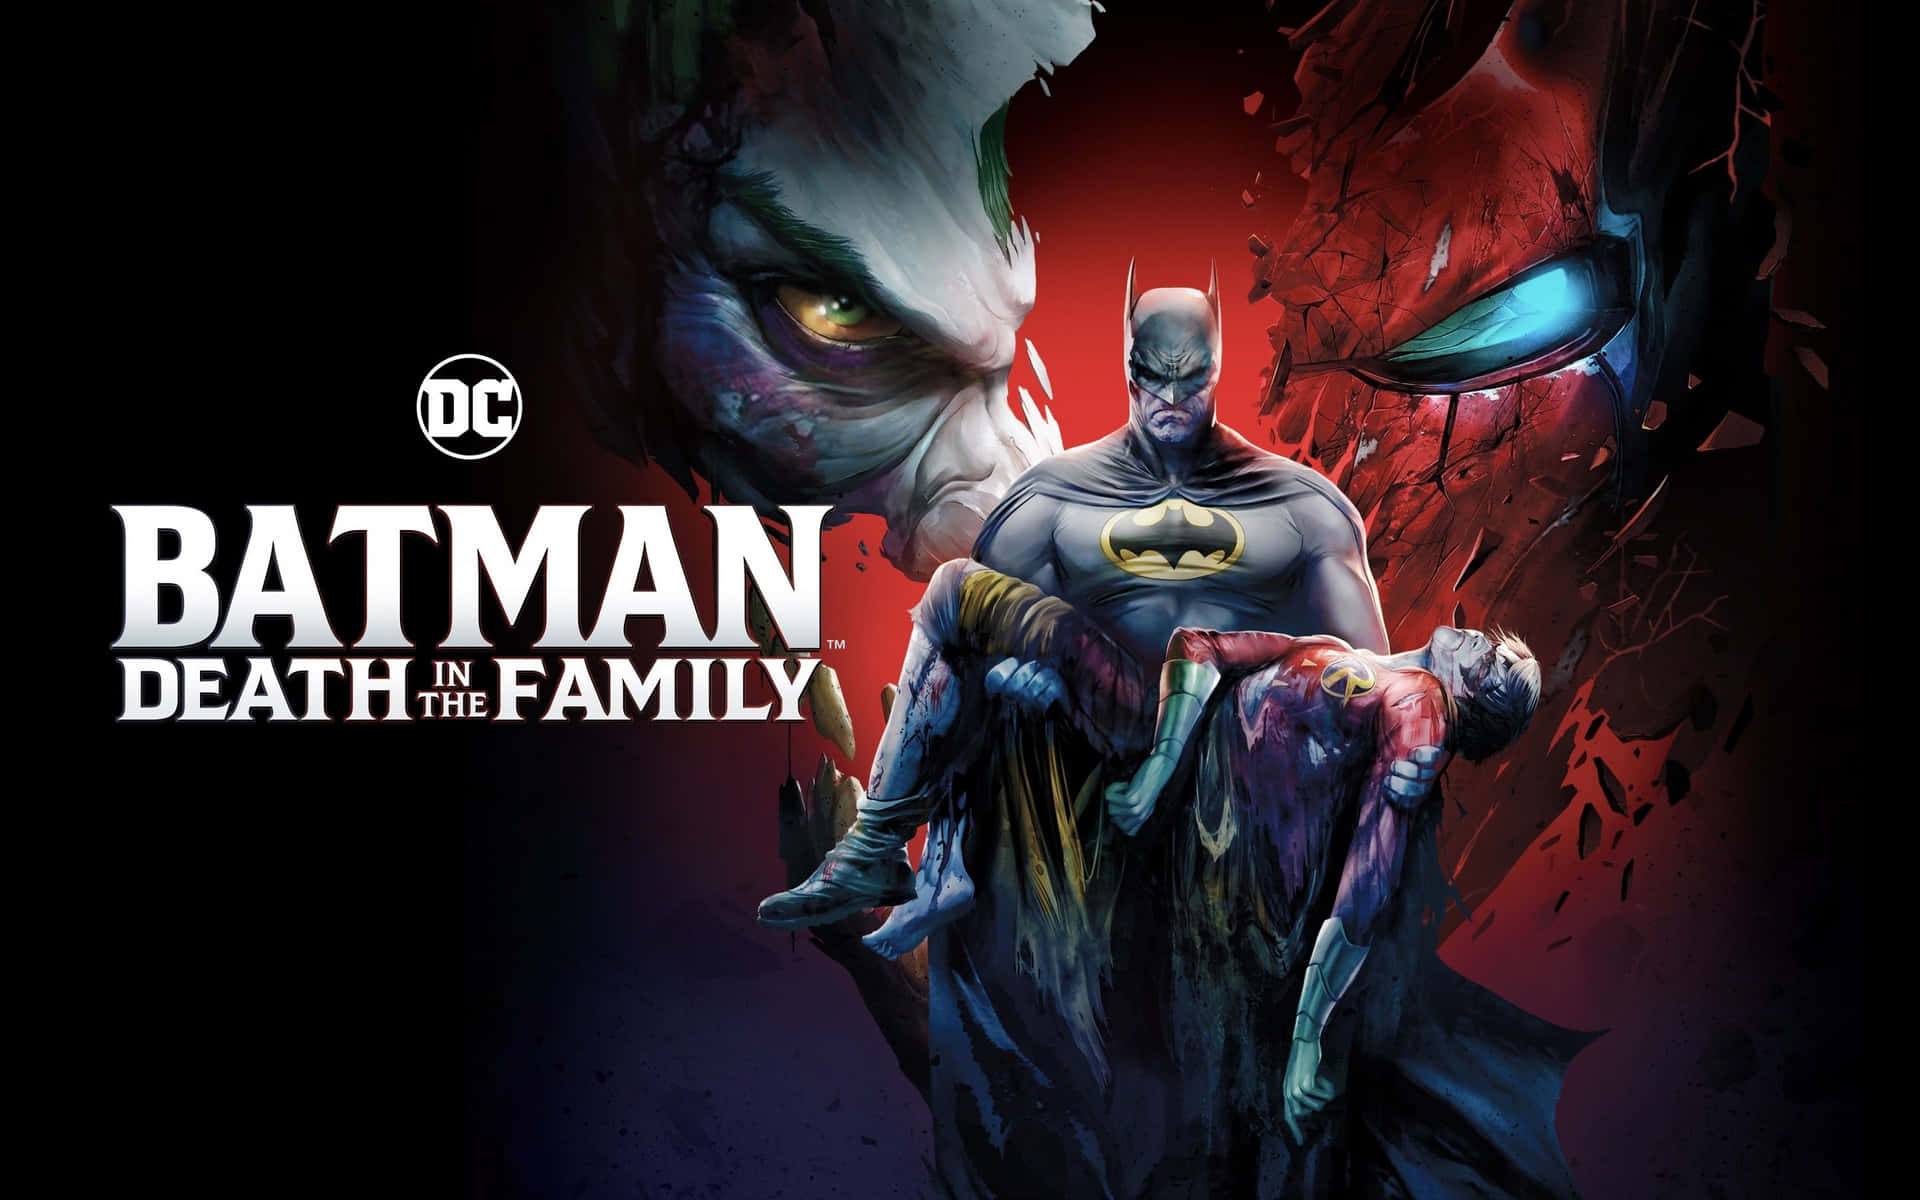 Batman mourning in the rain in "Death in the Family" Wallpaper